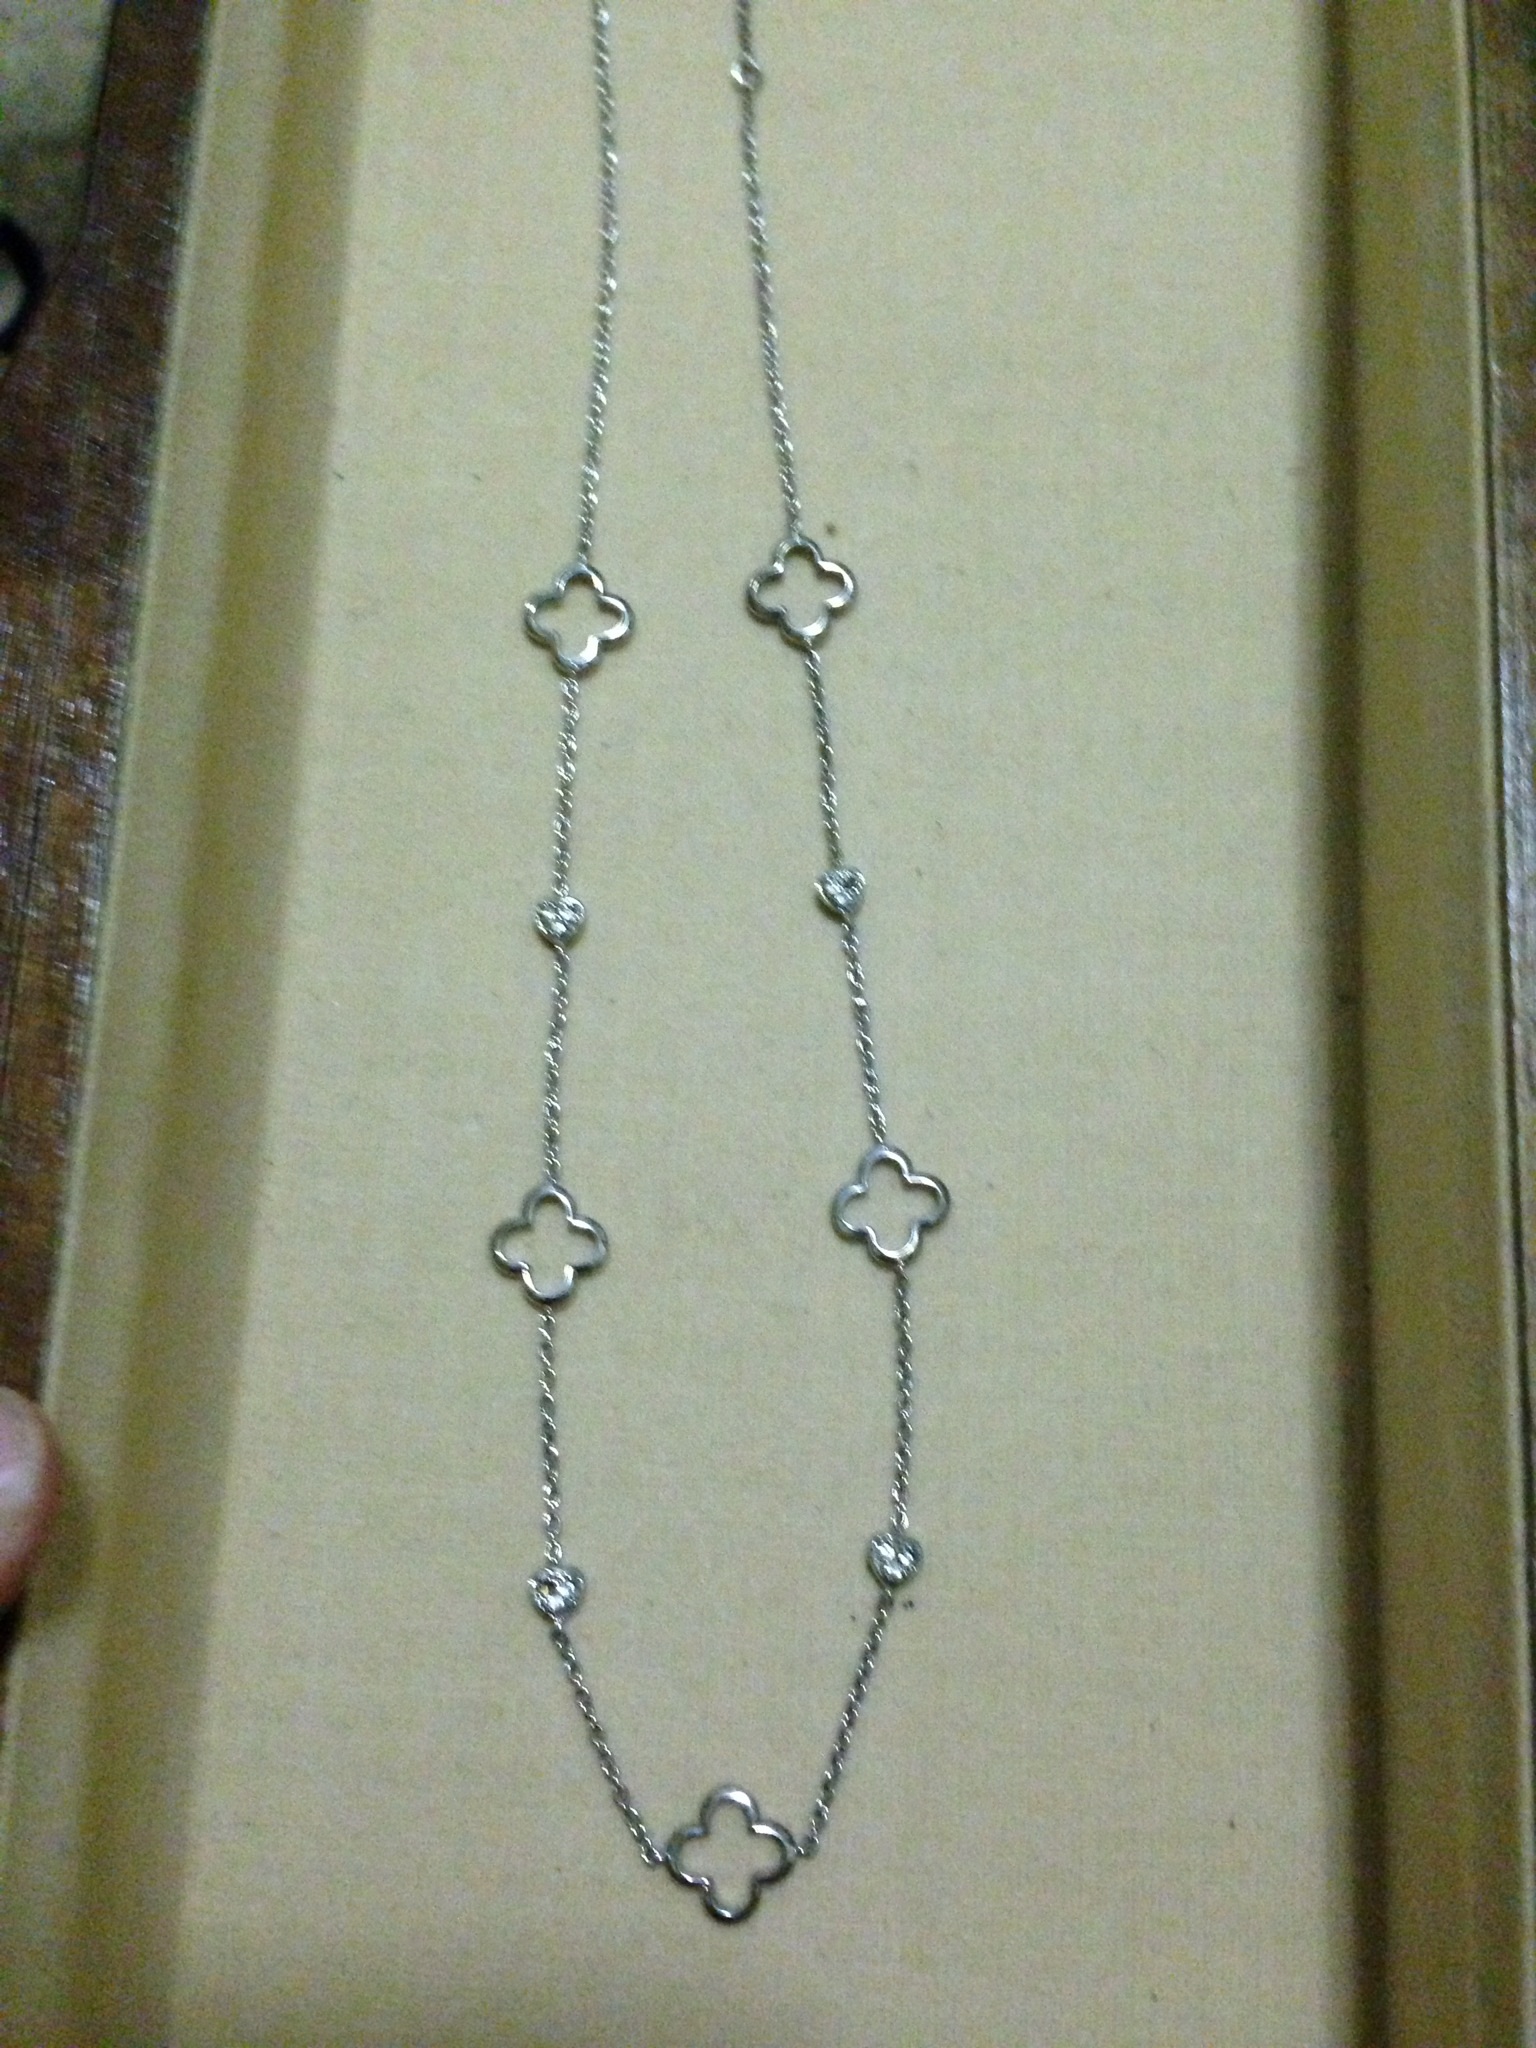 Clover like necklace